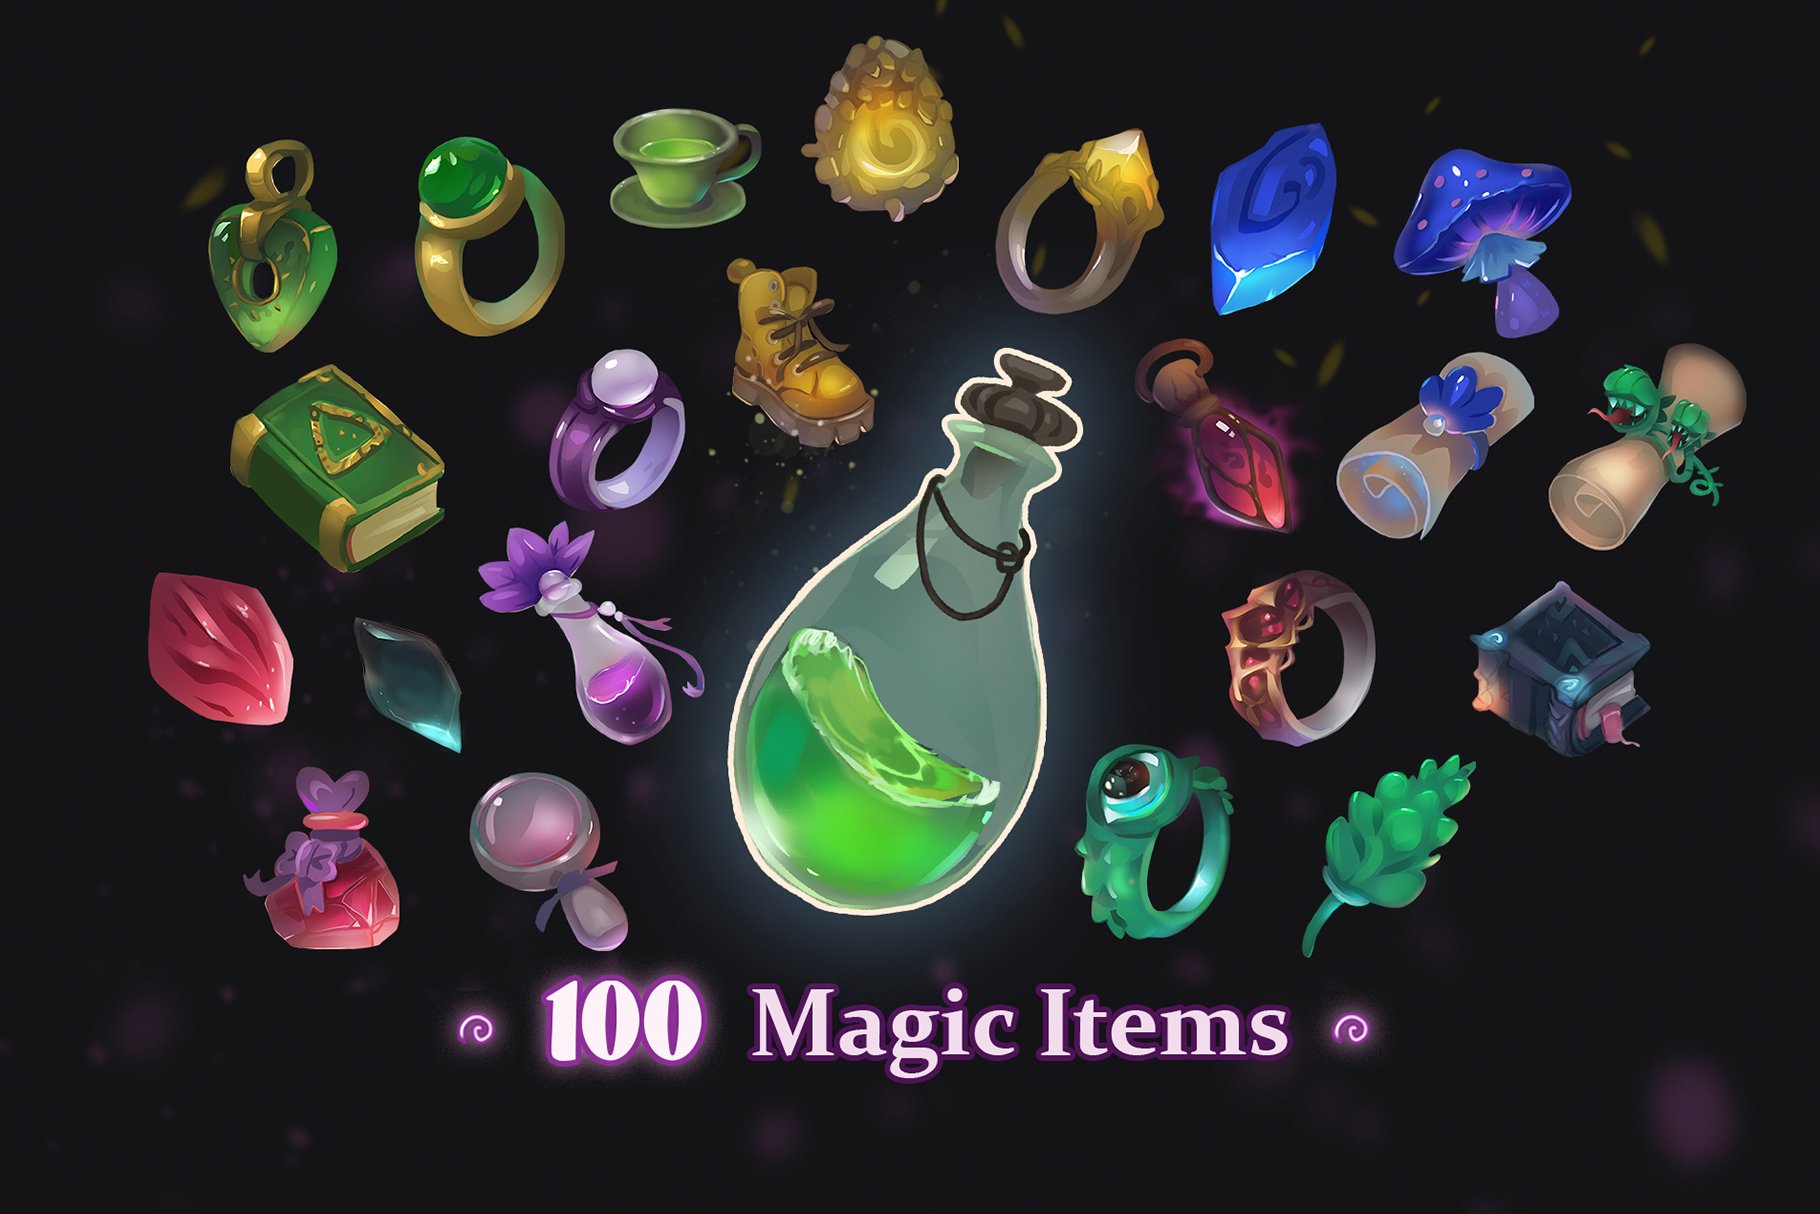 Stylized Magic Icons Pack Vol2 cover image.